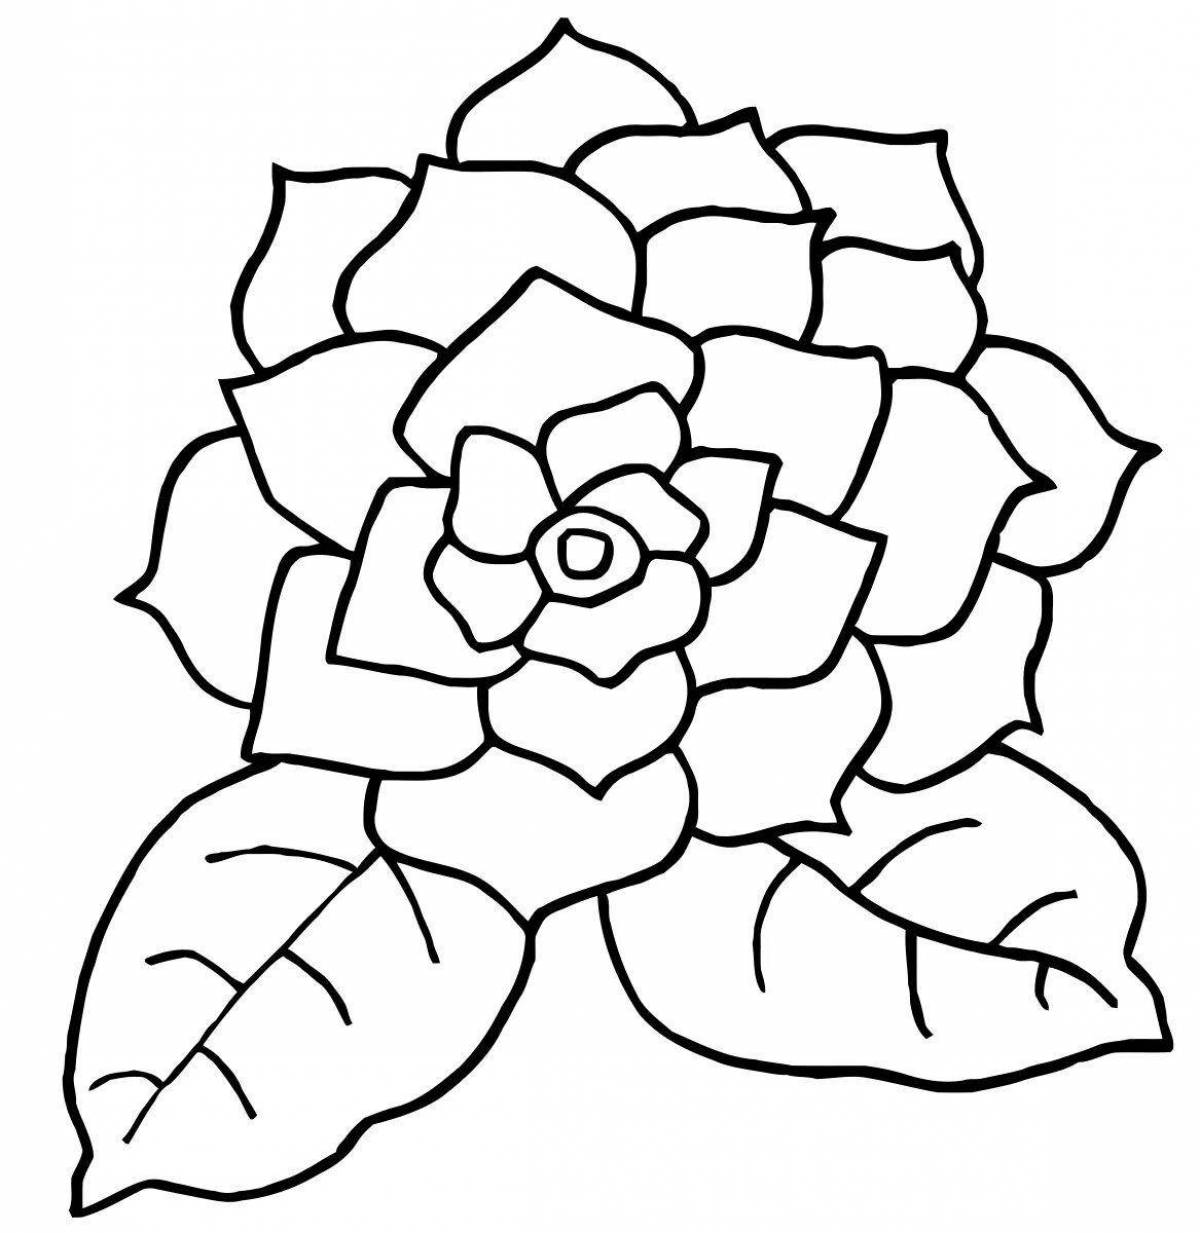 Awesome stone flower coloring pages for kids